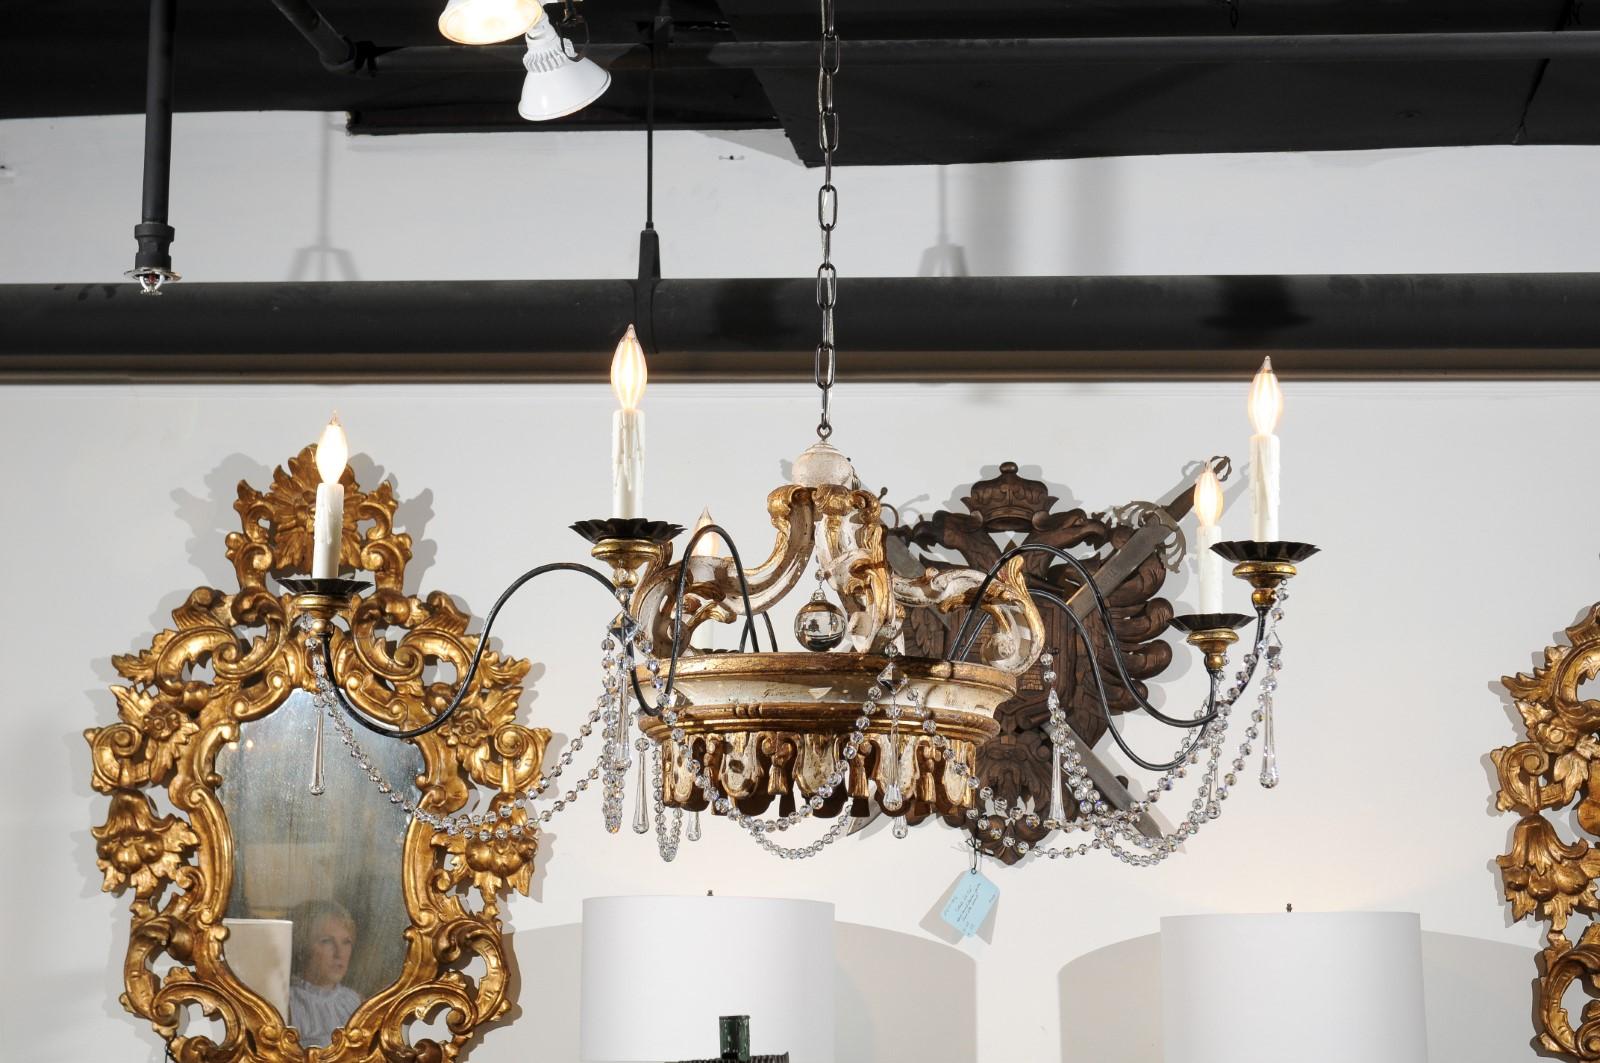 A one-of-a-kind contemporary Rococo style five-light painted and parcel-gilt crown chandelier made from 19th century Italian parts. Our eye is immediately drawn to the central Italian hand-carved crown, topped with delicate volutes joined in their